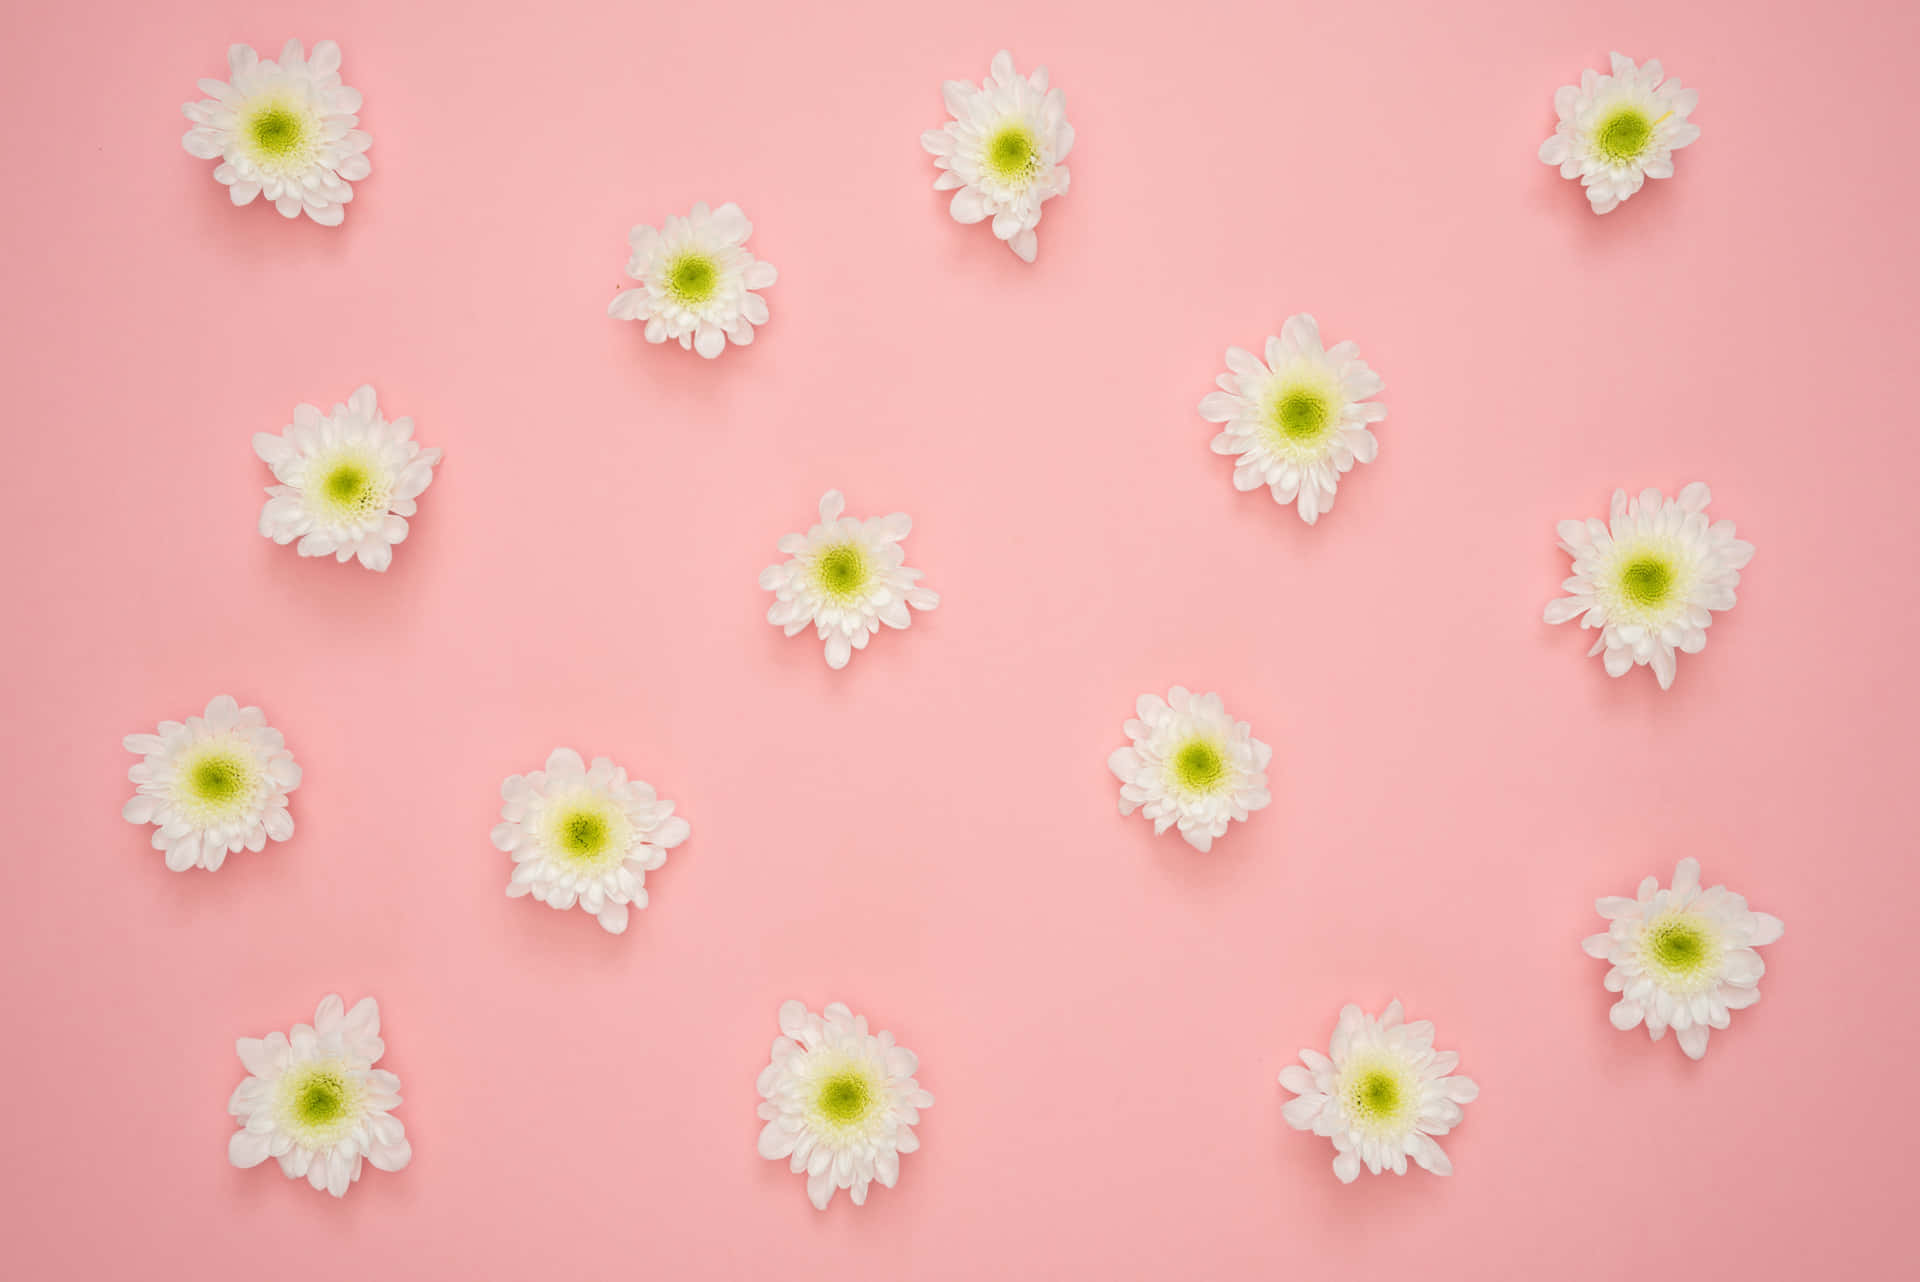 Flowers On Pink Surface Picture